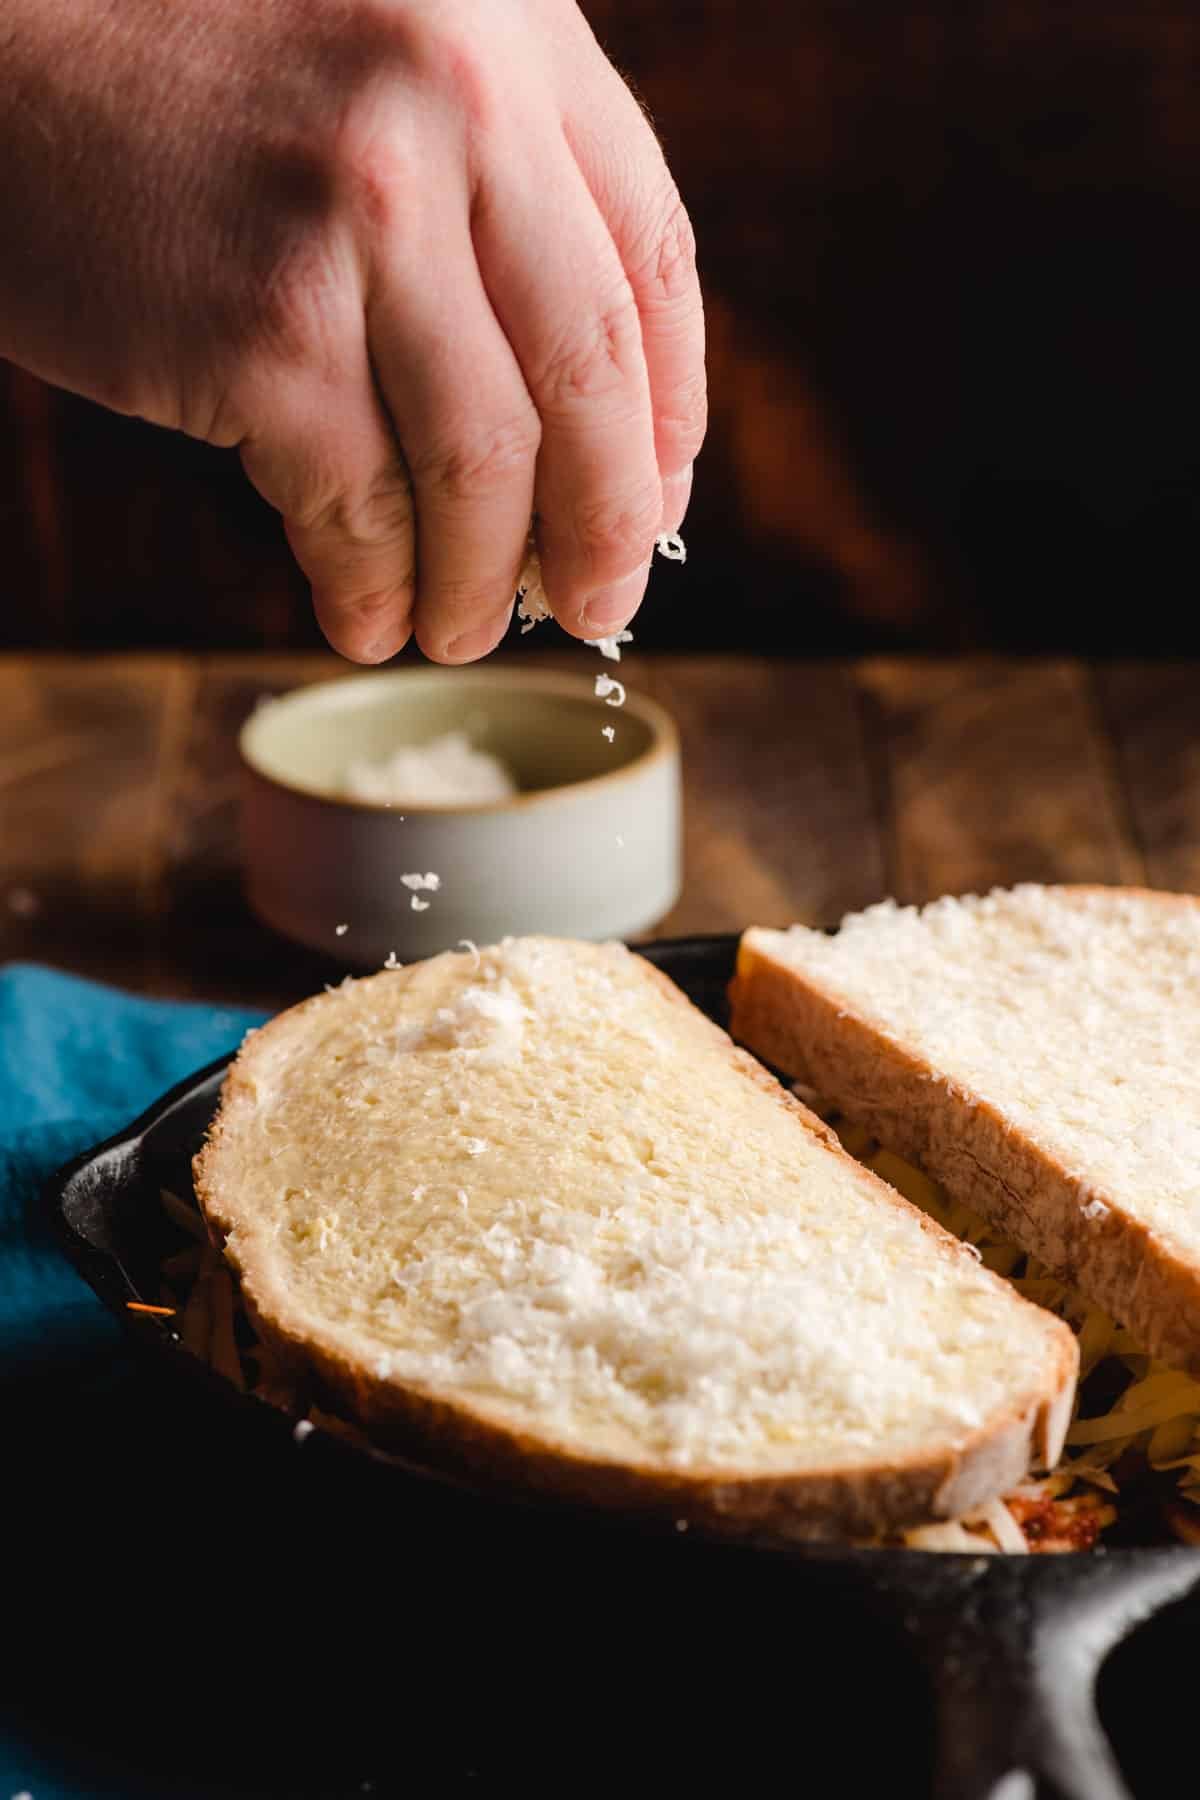 Hand sprinkling parmesan cheese on top of buttered bread.